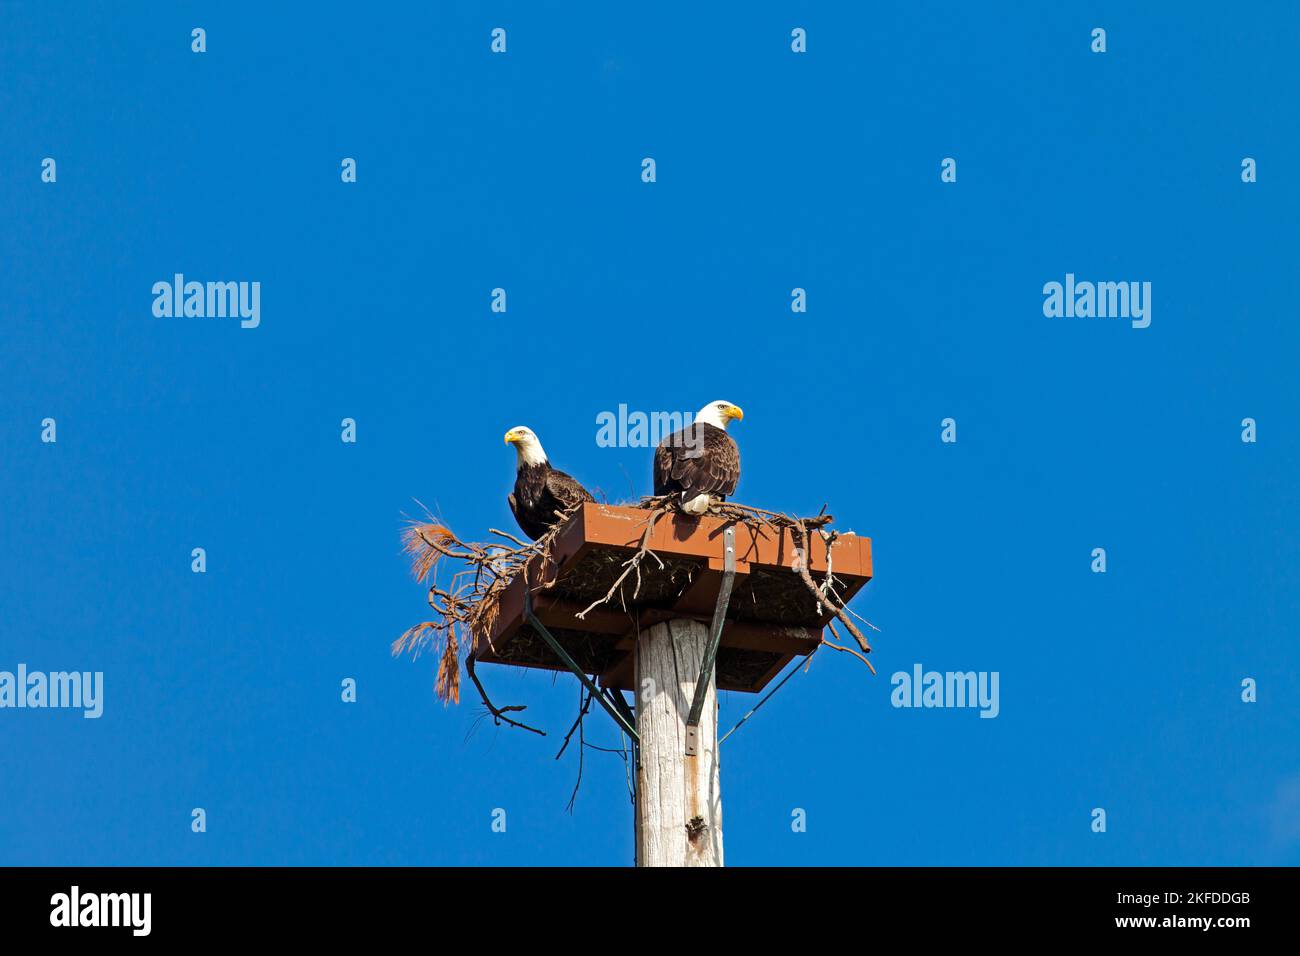 American bald eagles keeping watch over a nest a top a pole. Elements of this image furnished by NASA. Stock Photo